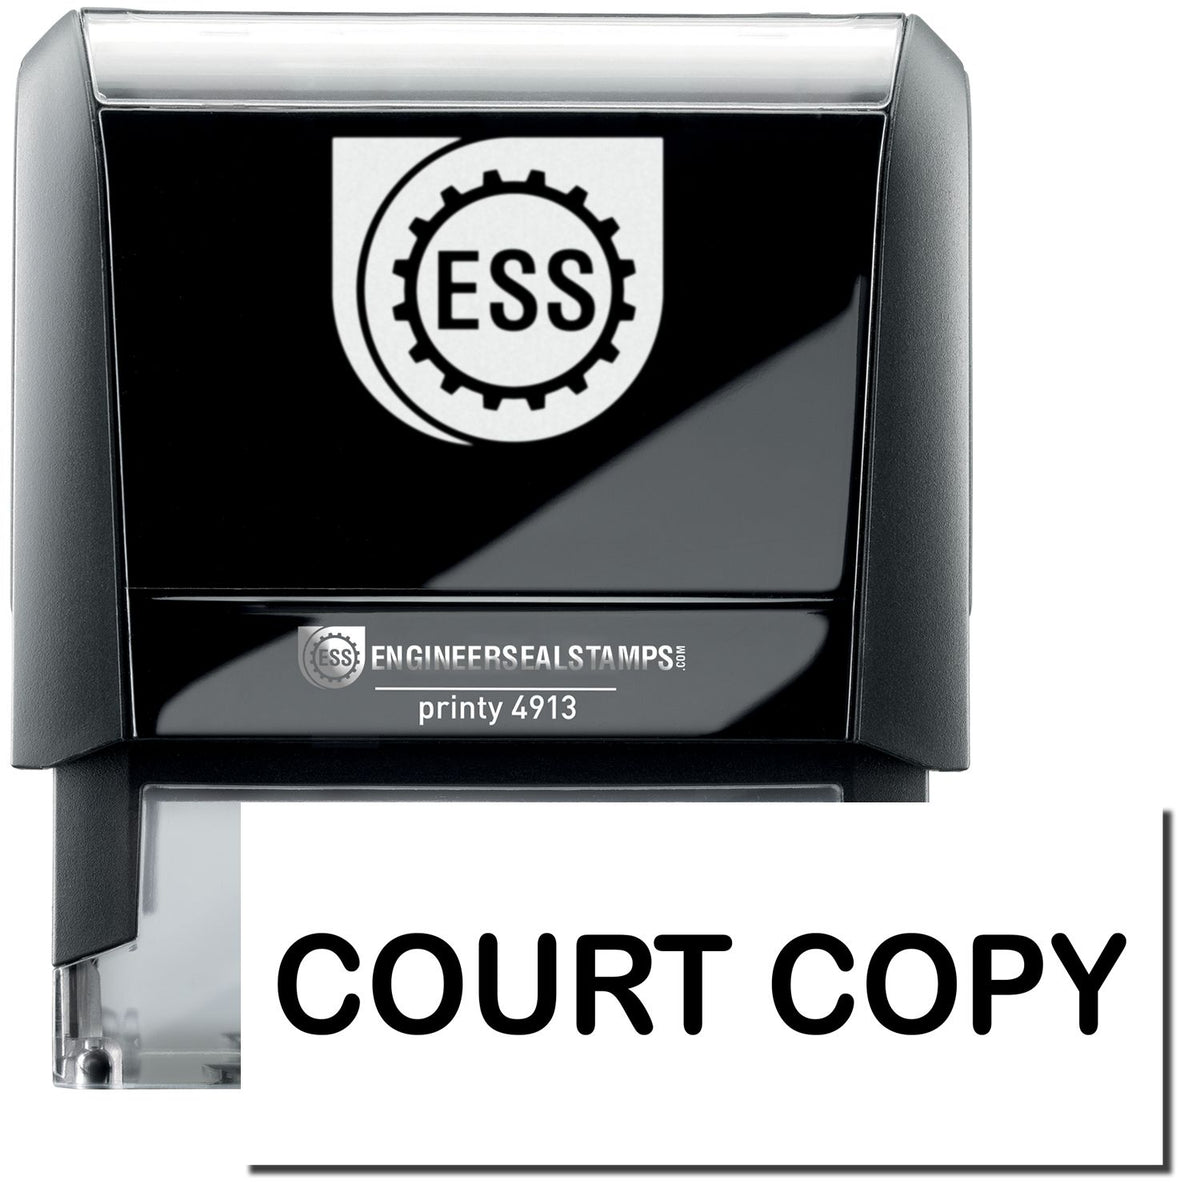 A self-inking stamp with a stamped image showing how the text &quot;COURT COPY&quot; in a large bold font is displayed by it.